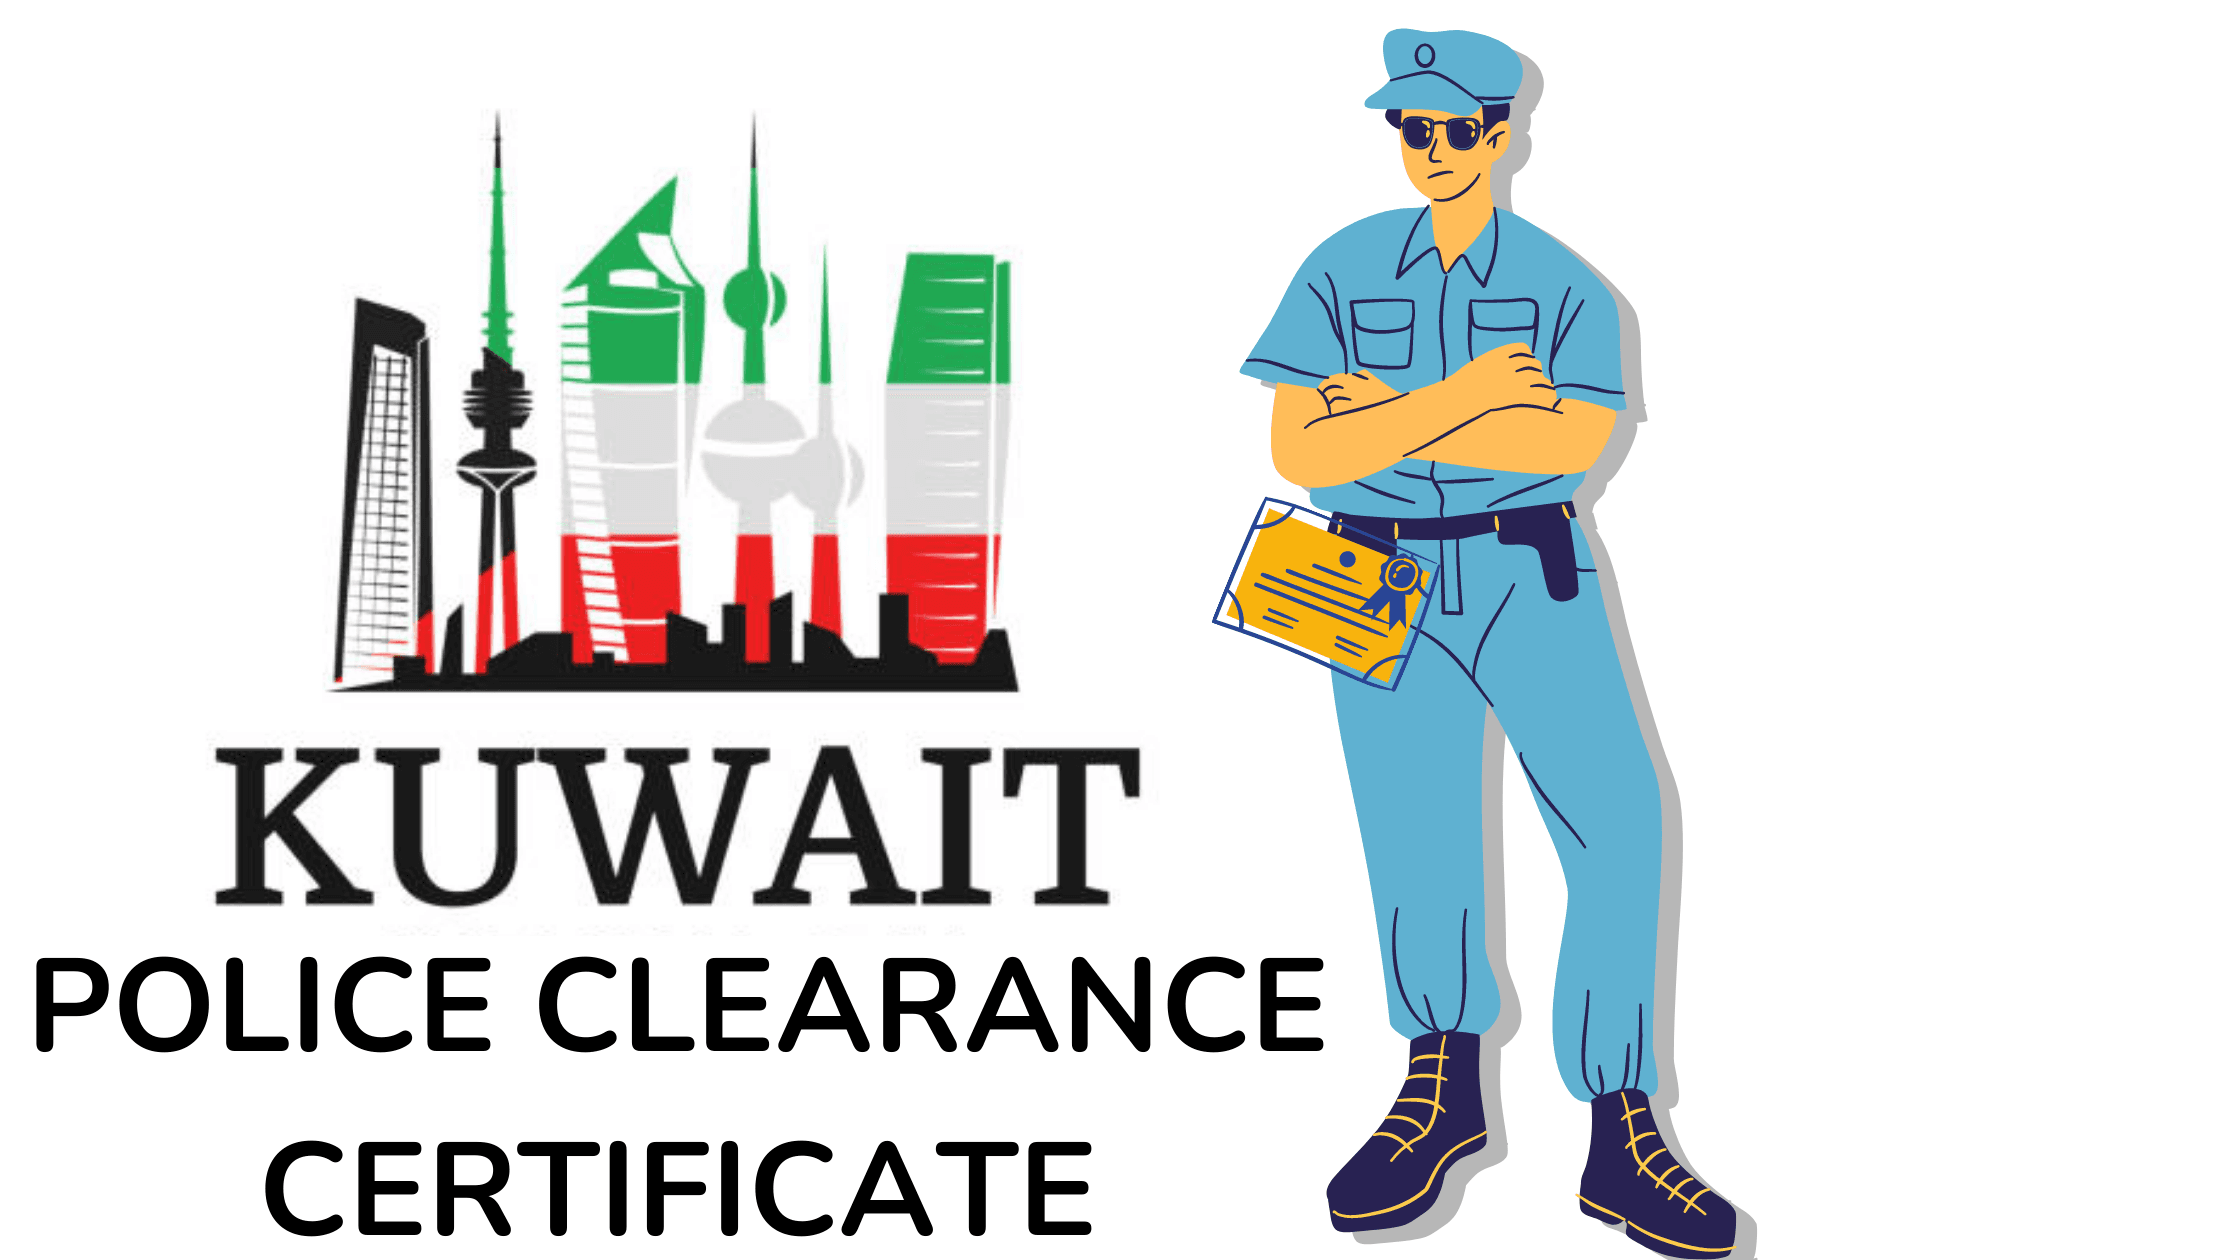 Kuwait Police Clearance Certificate Attestation